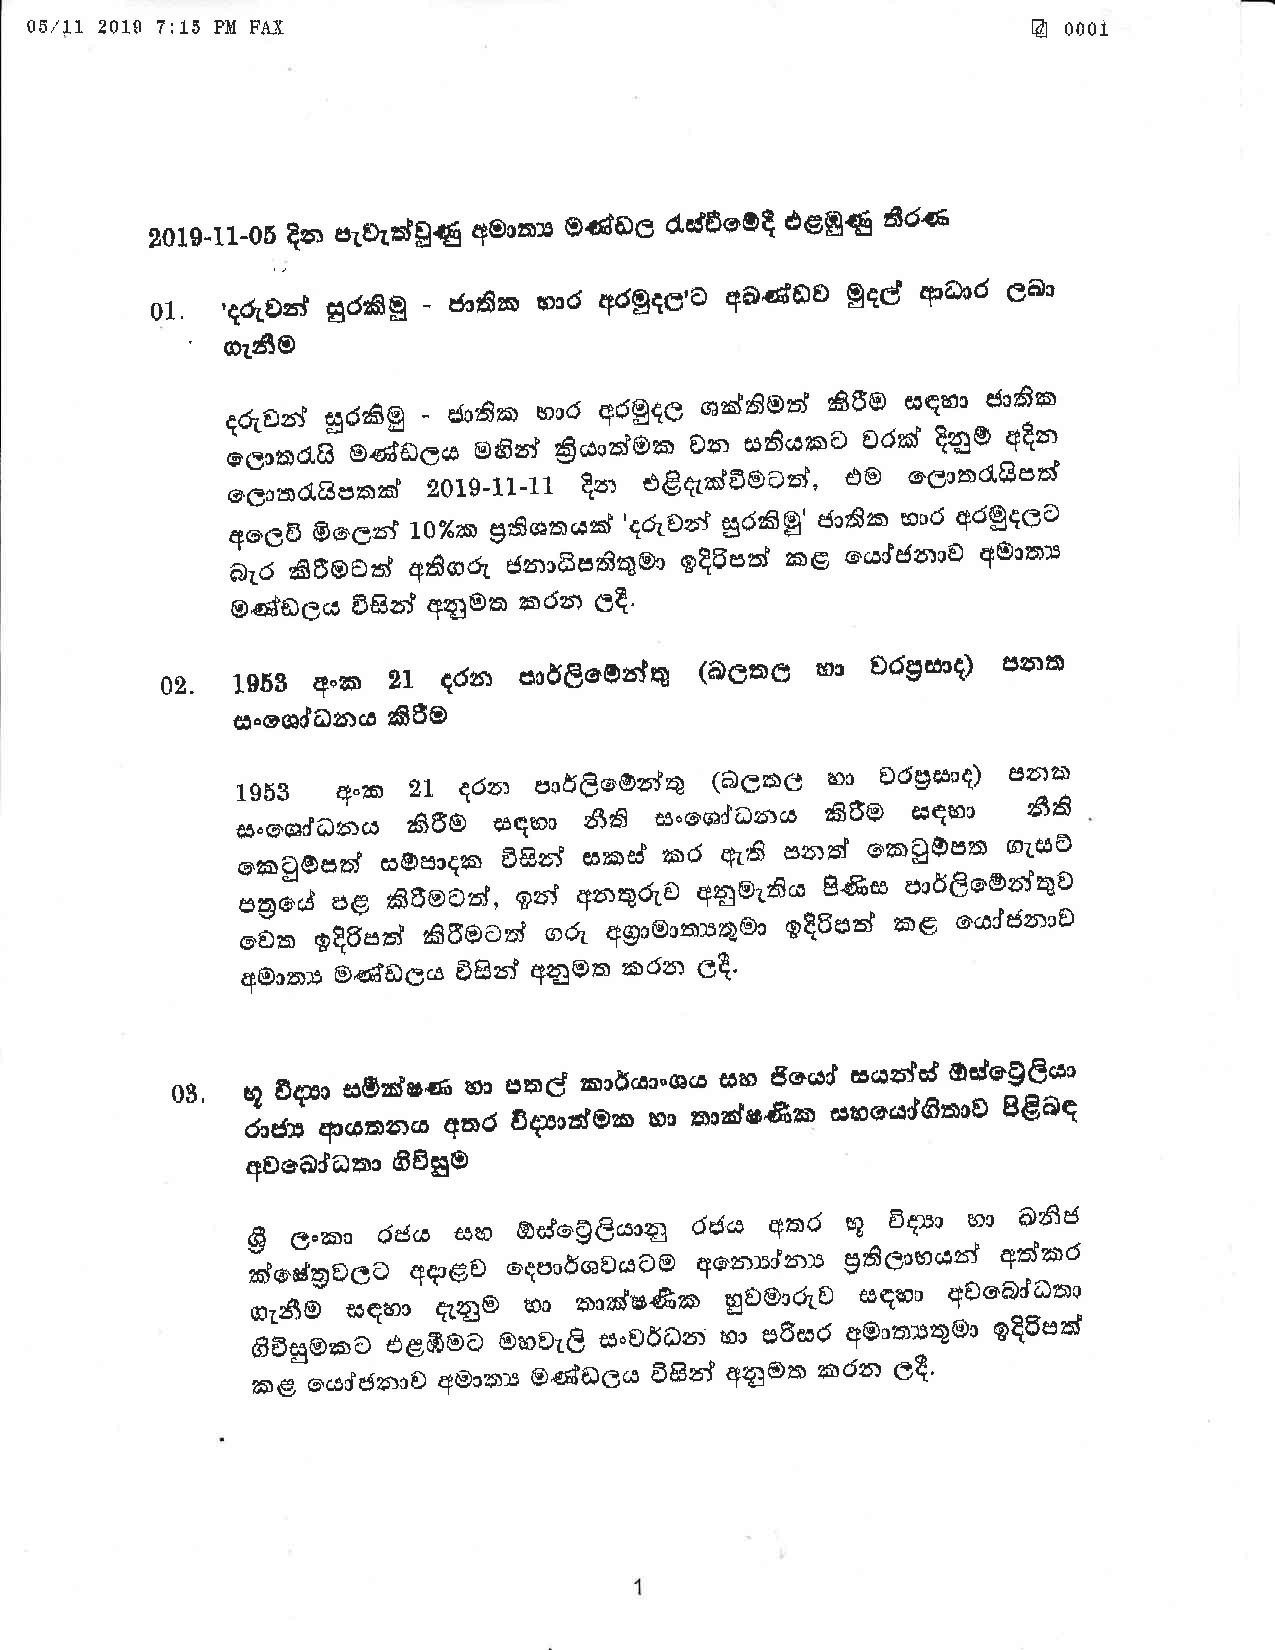 Cabinet Decision on 05.11.2019 page 001